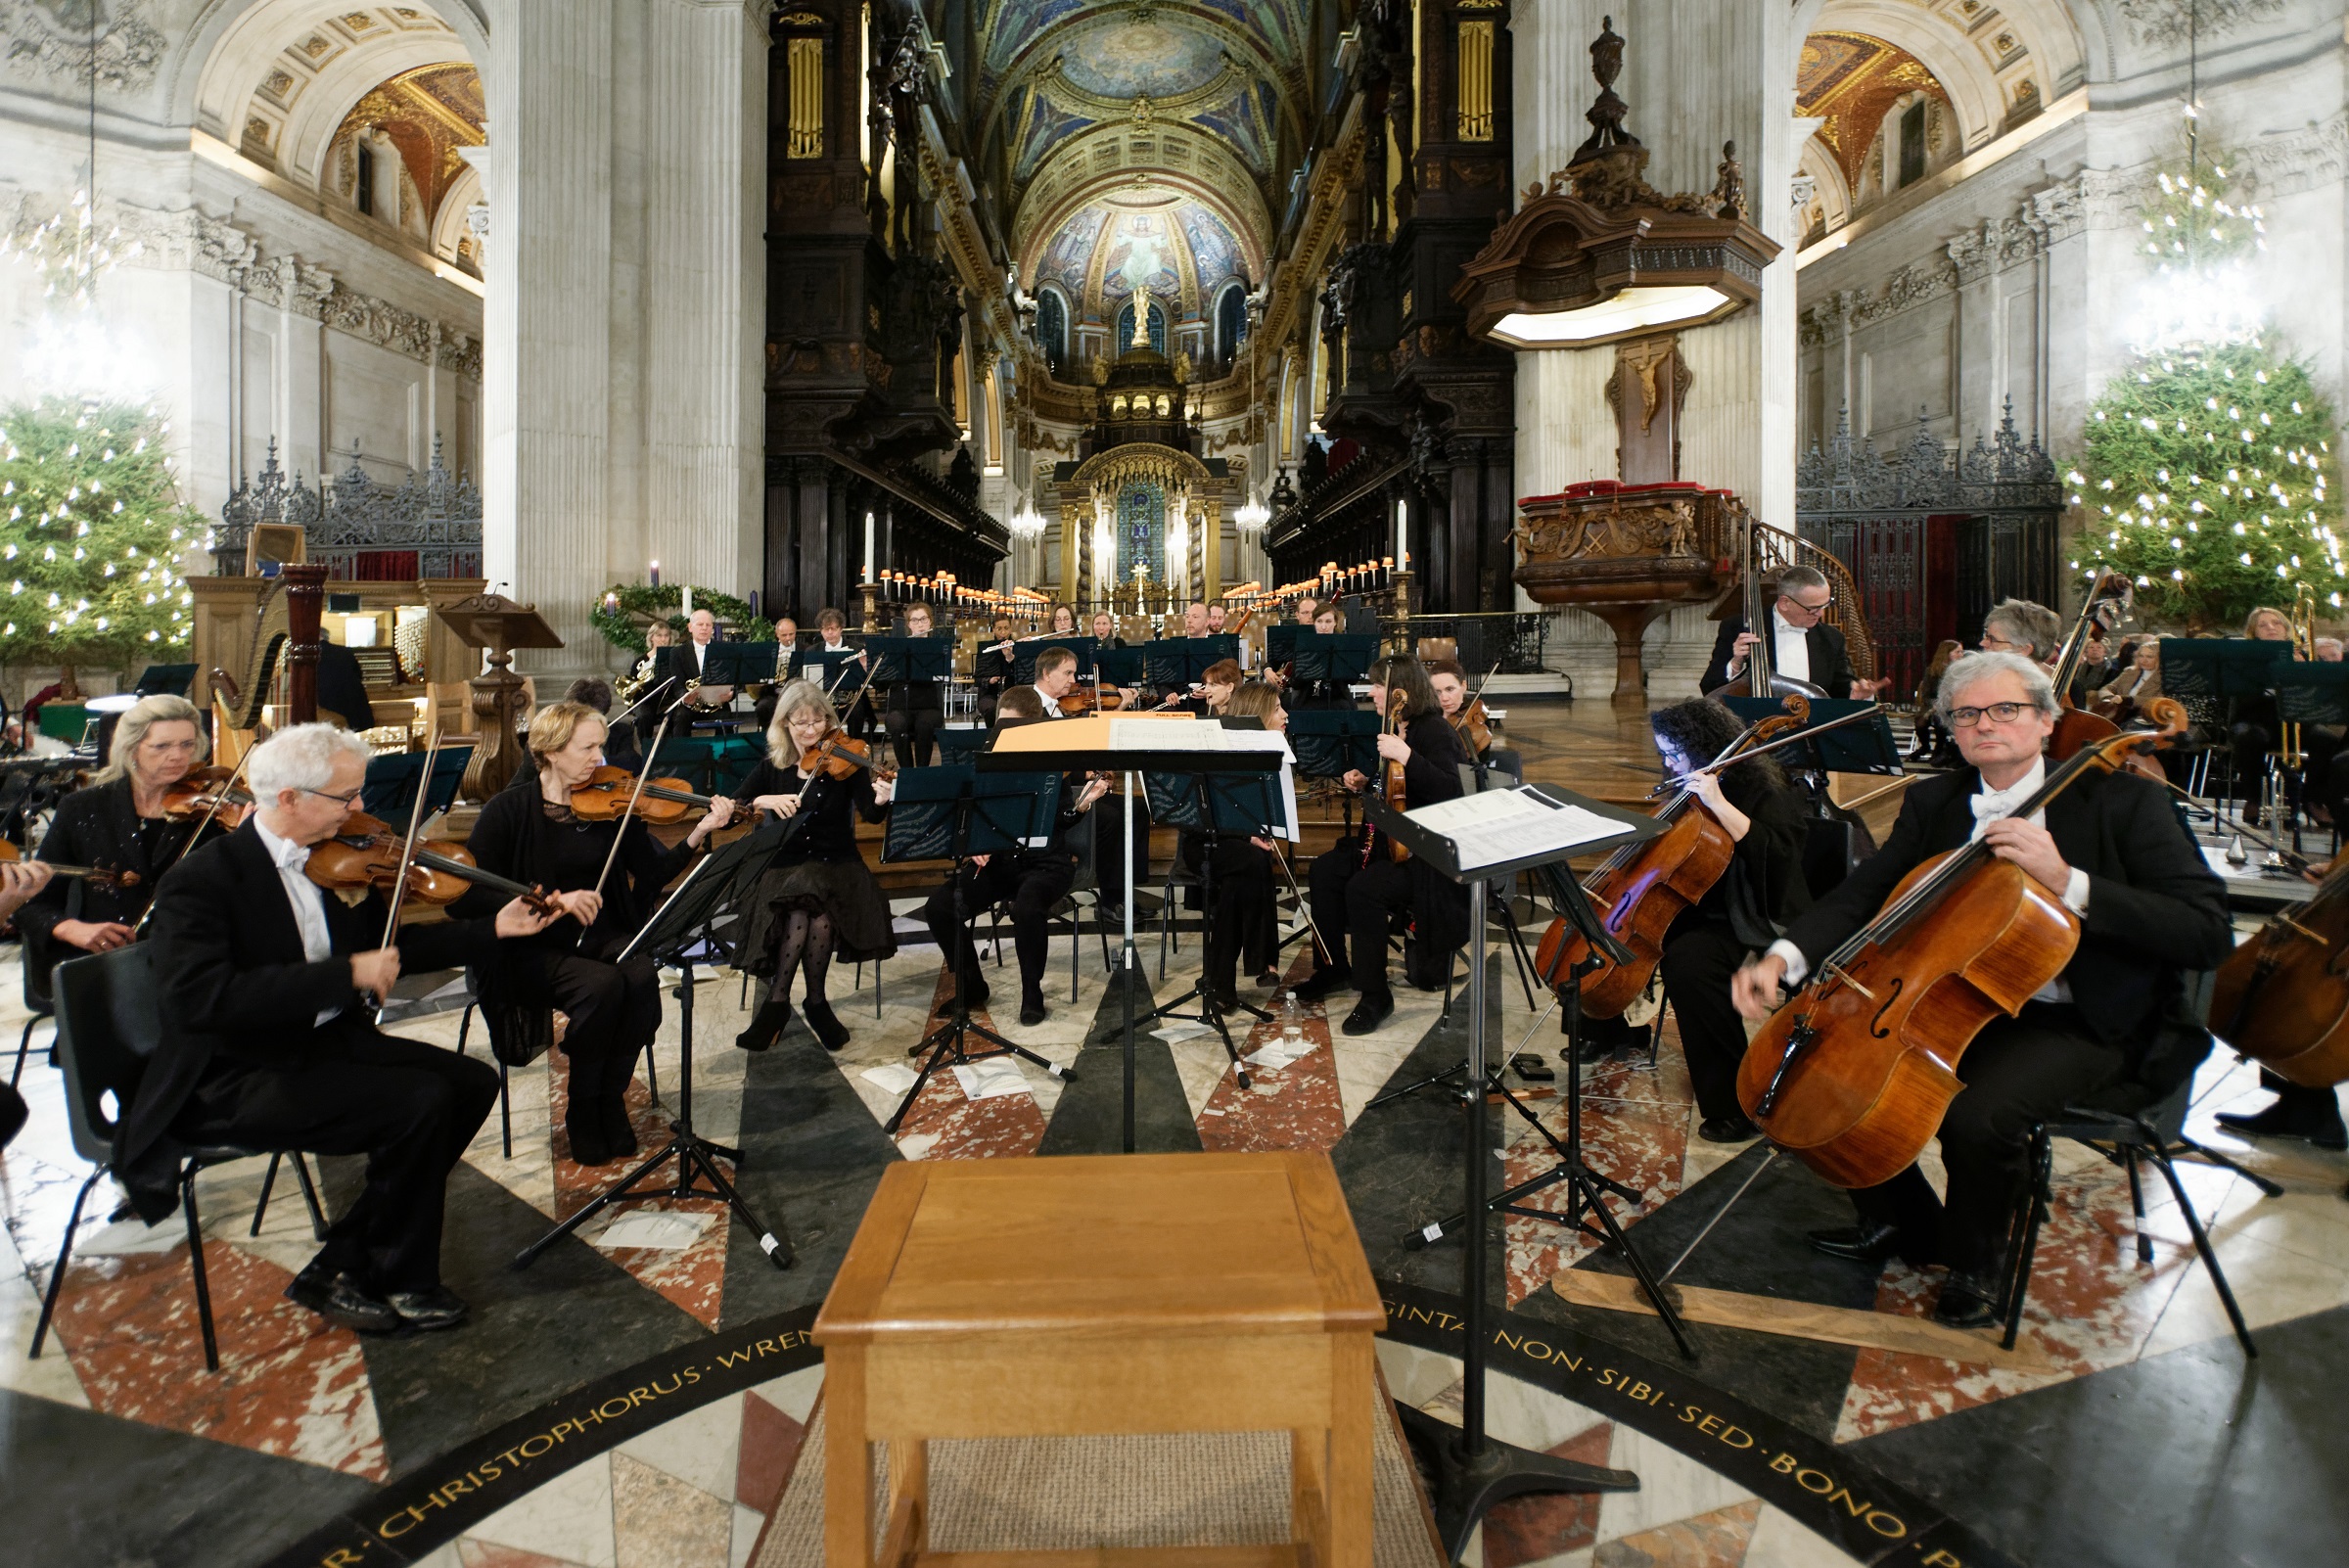 orchestra playing music under the Dome